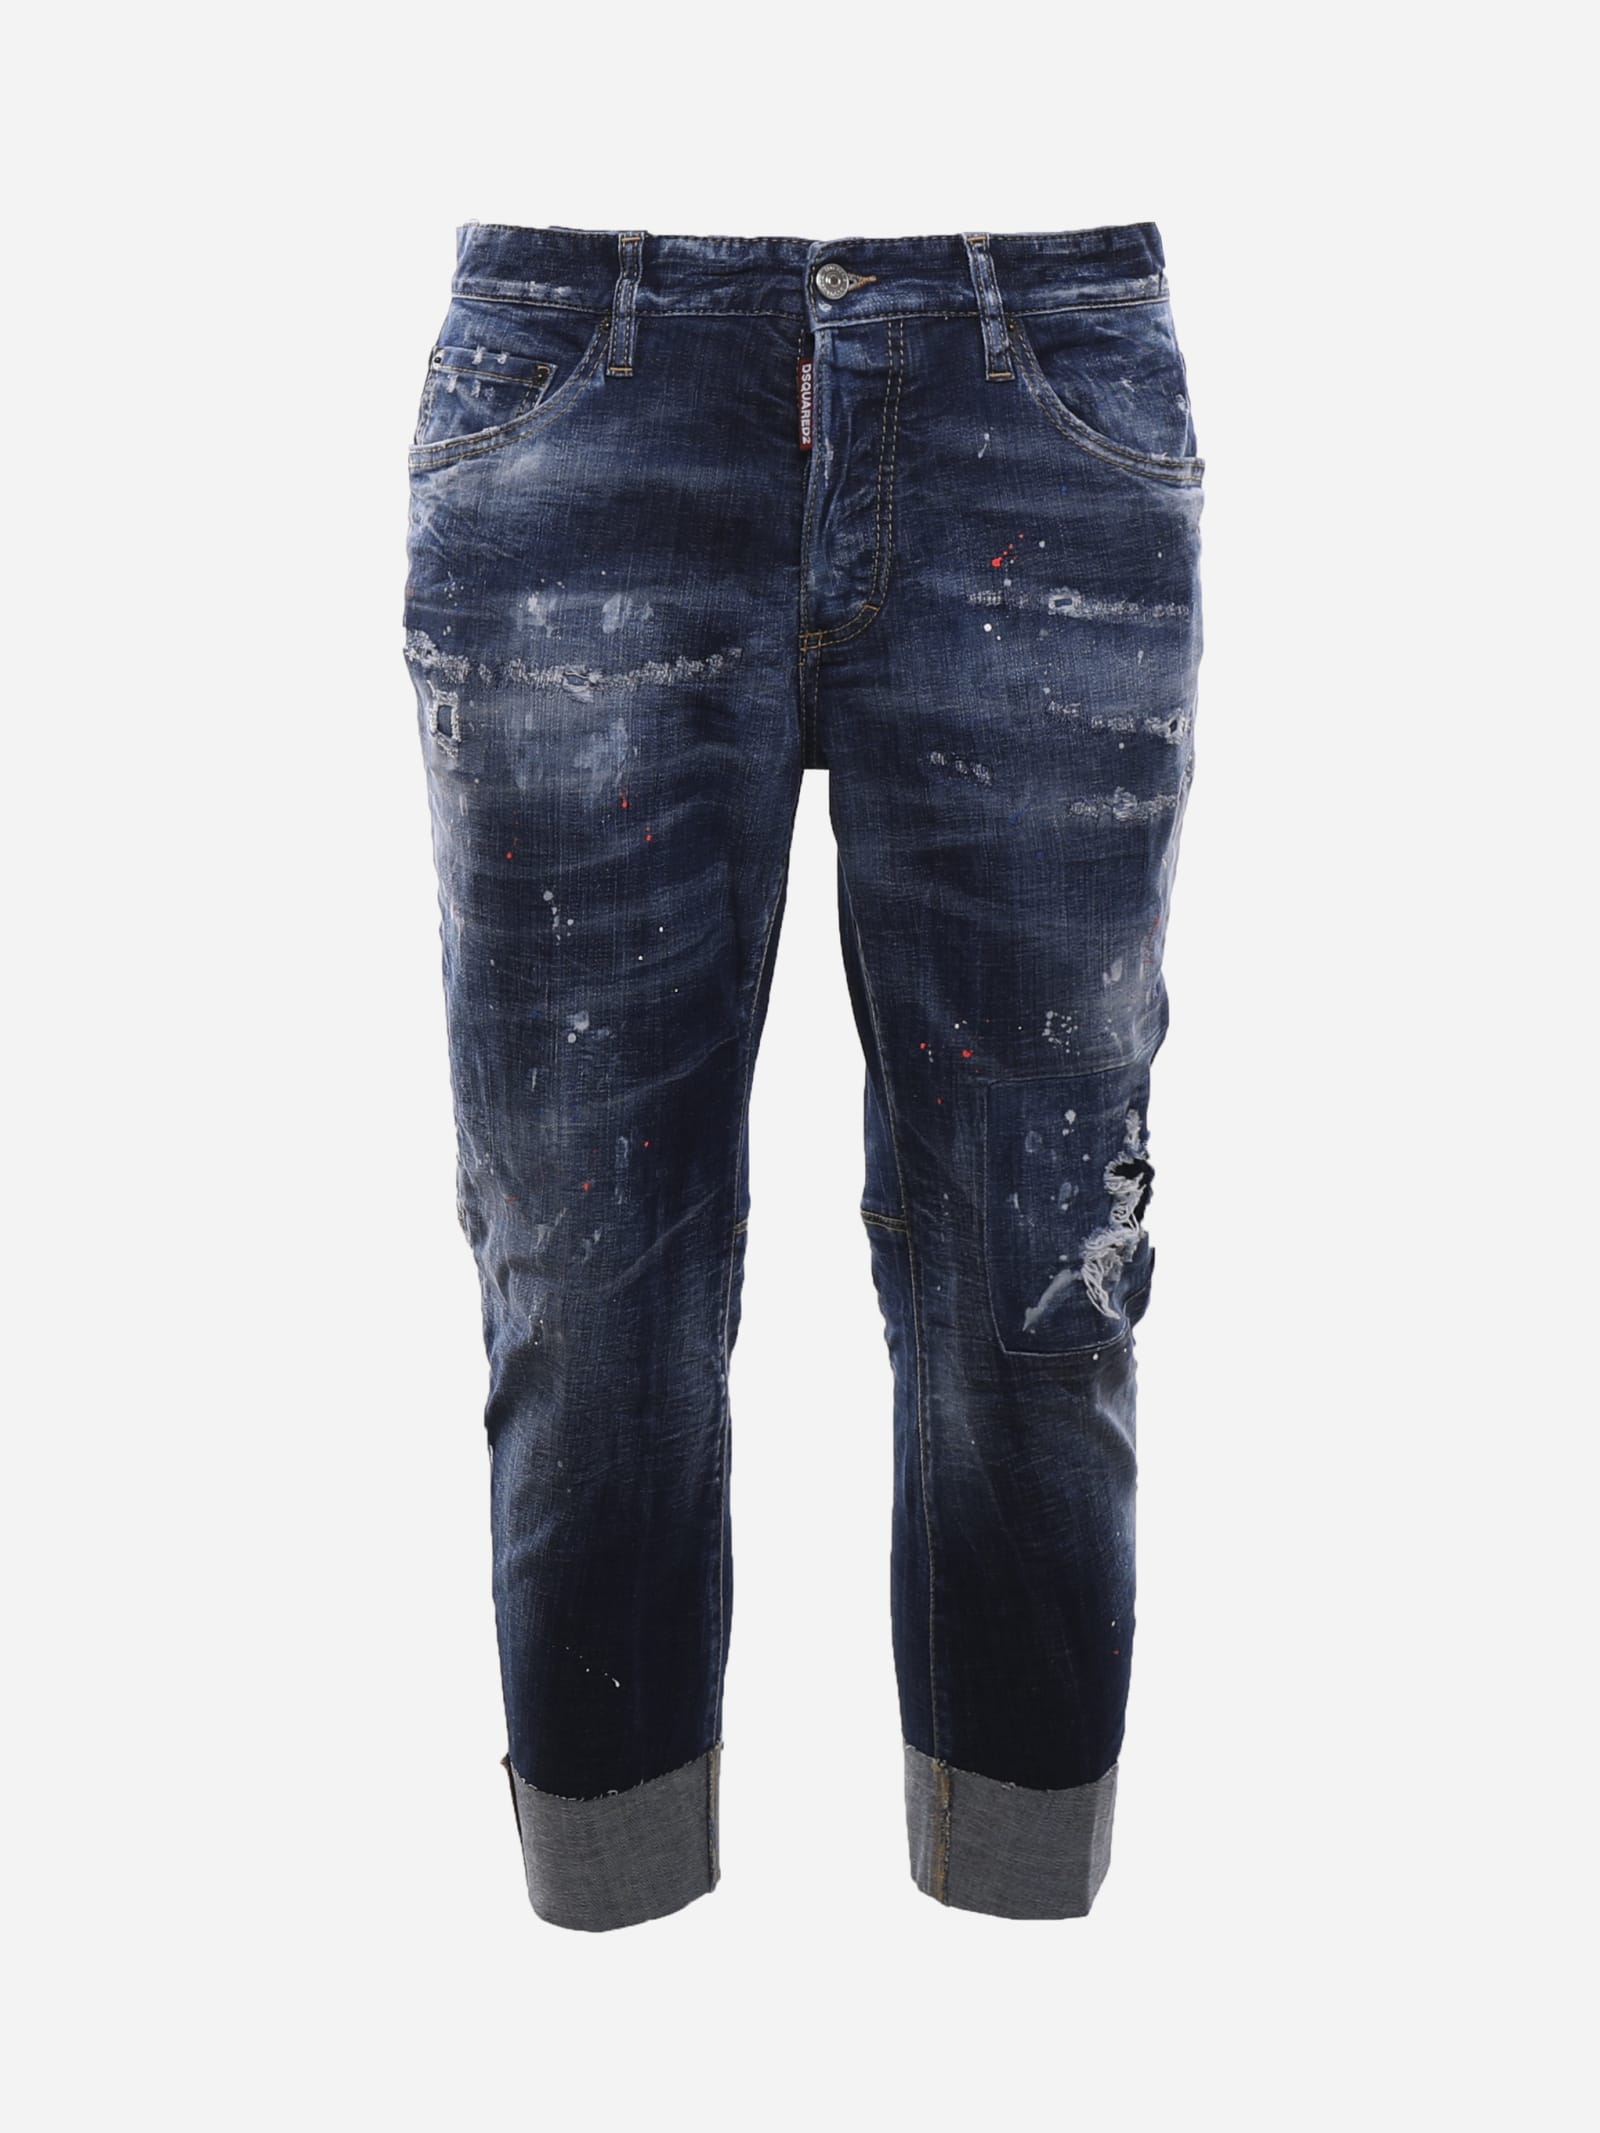 DSQUARED2 FADED-EFFECT STRETCH COTTON JEANS WITH TEARS,S71LB0896 S30342470